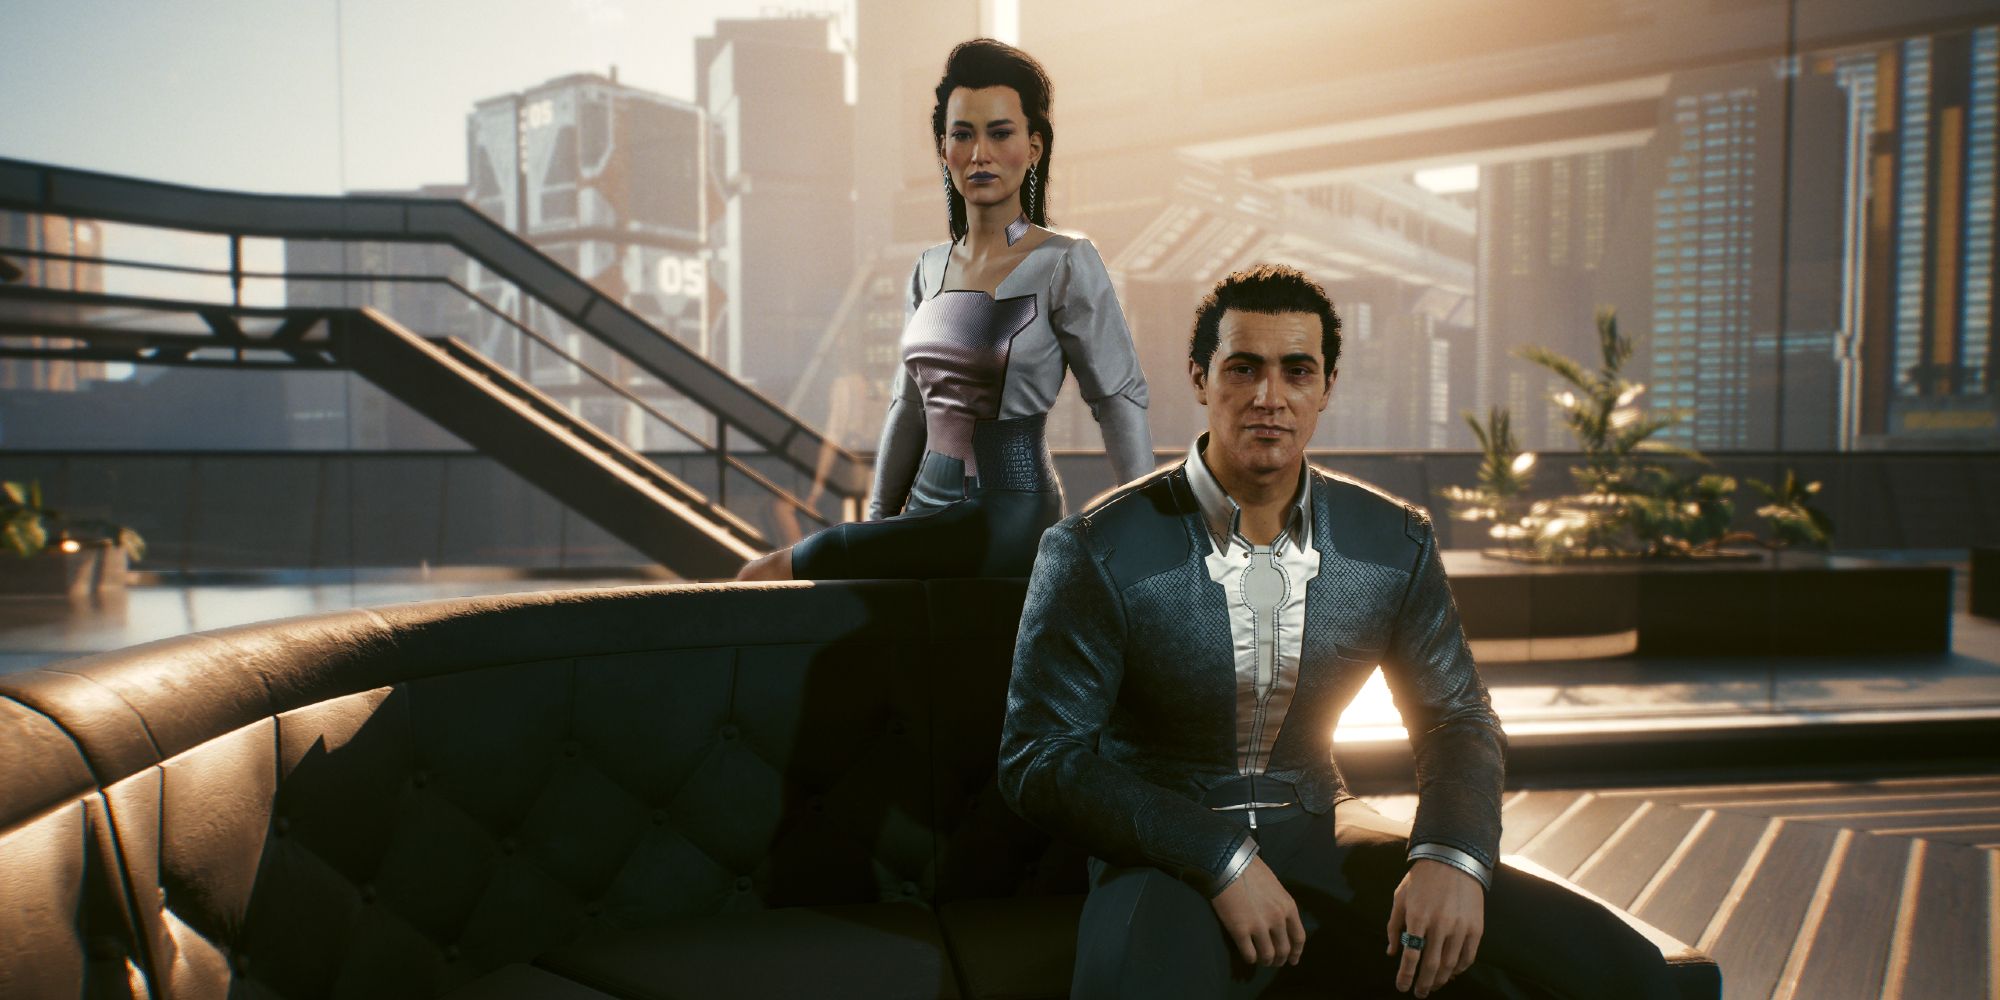 Jefferson And Elizabeth Peralez sitting together in their apartment in Cyberpunk 2077.